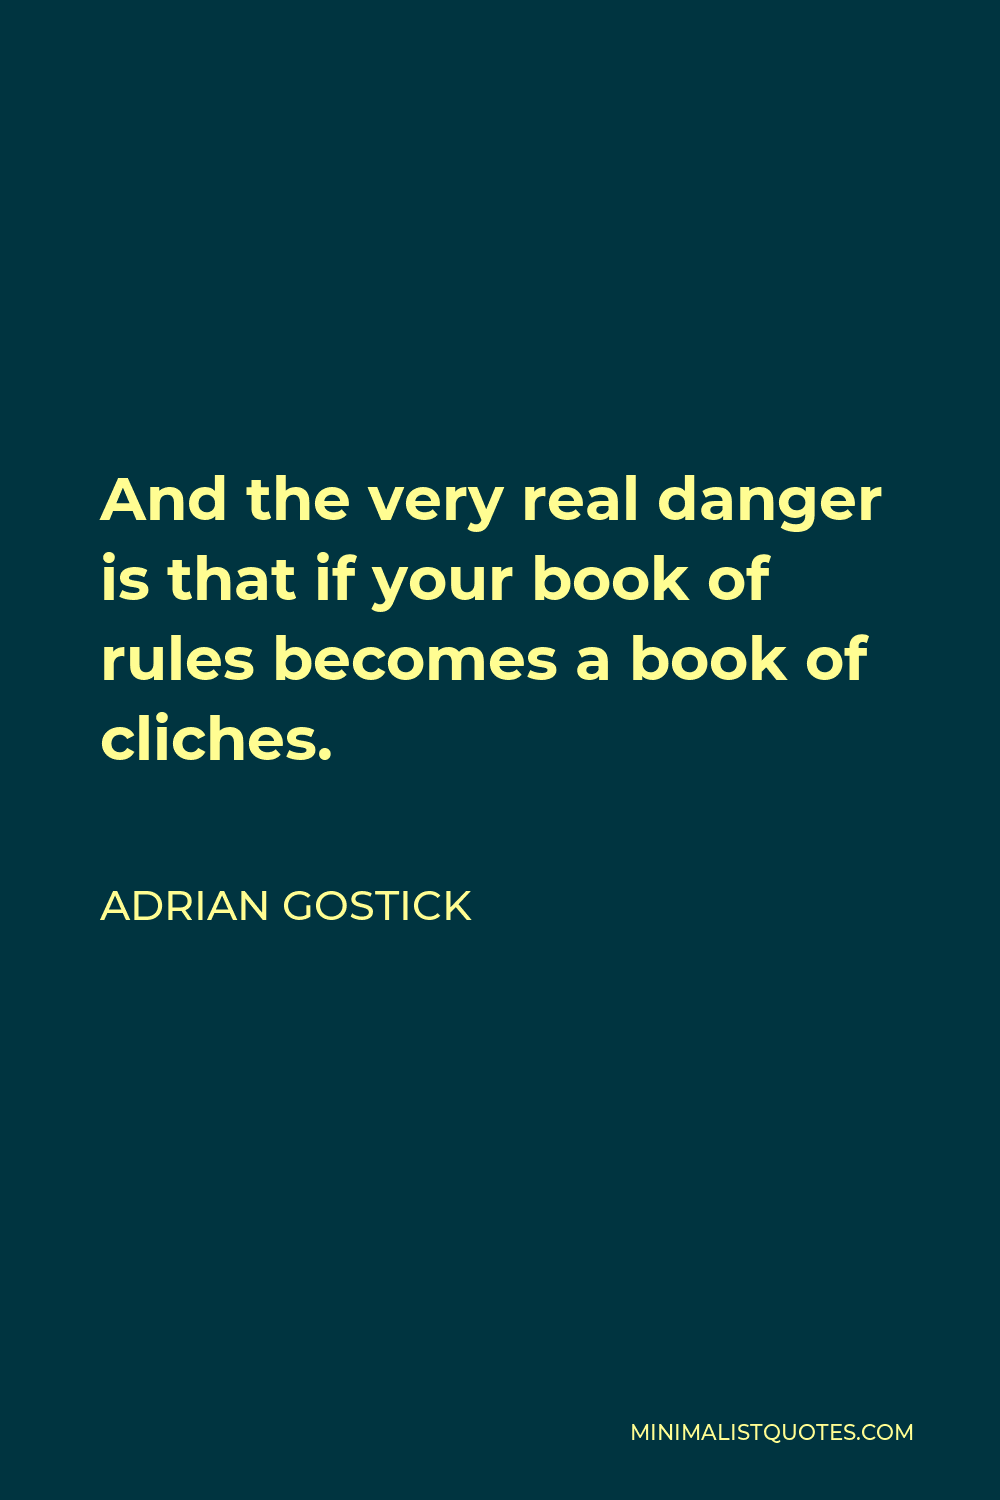 Adrian Gostick Quote - And the very real danger is that if your book of rules becomes a book of cliches.